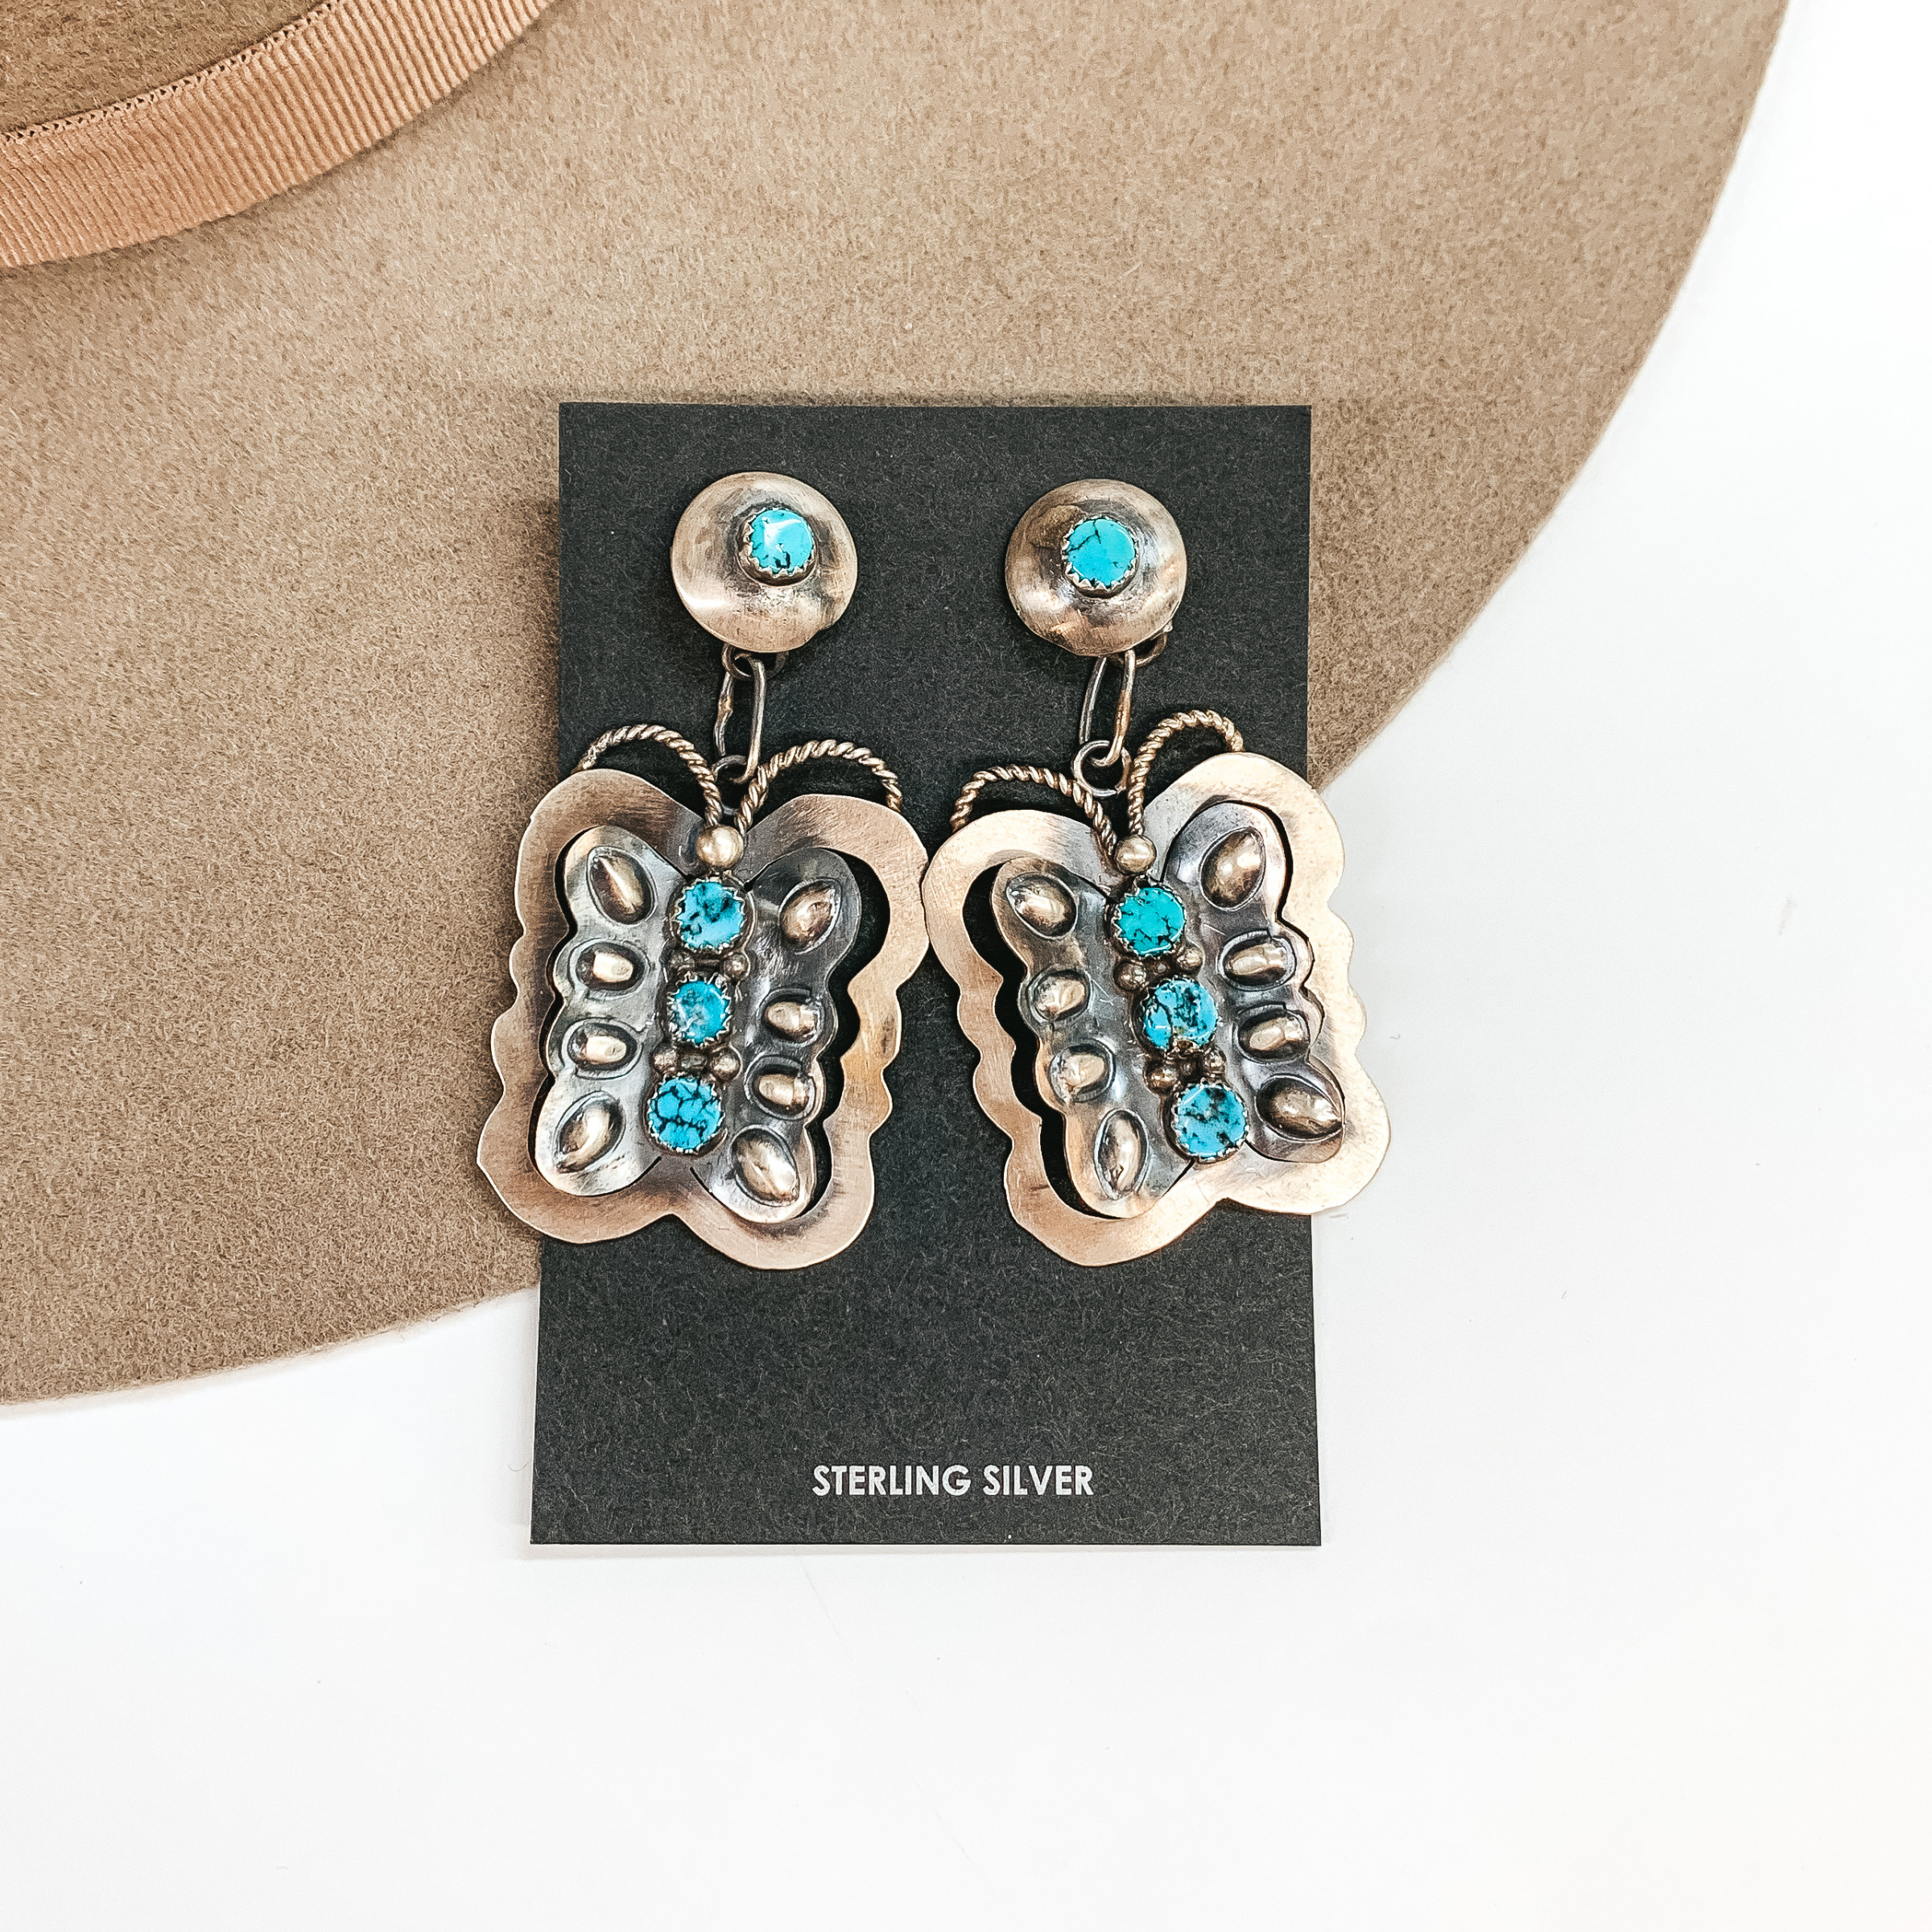 GTY | Navajo Handmade Sterling Silver Butterfly Earrings with Turquoise Stones